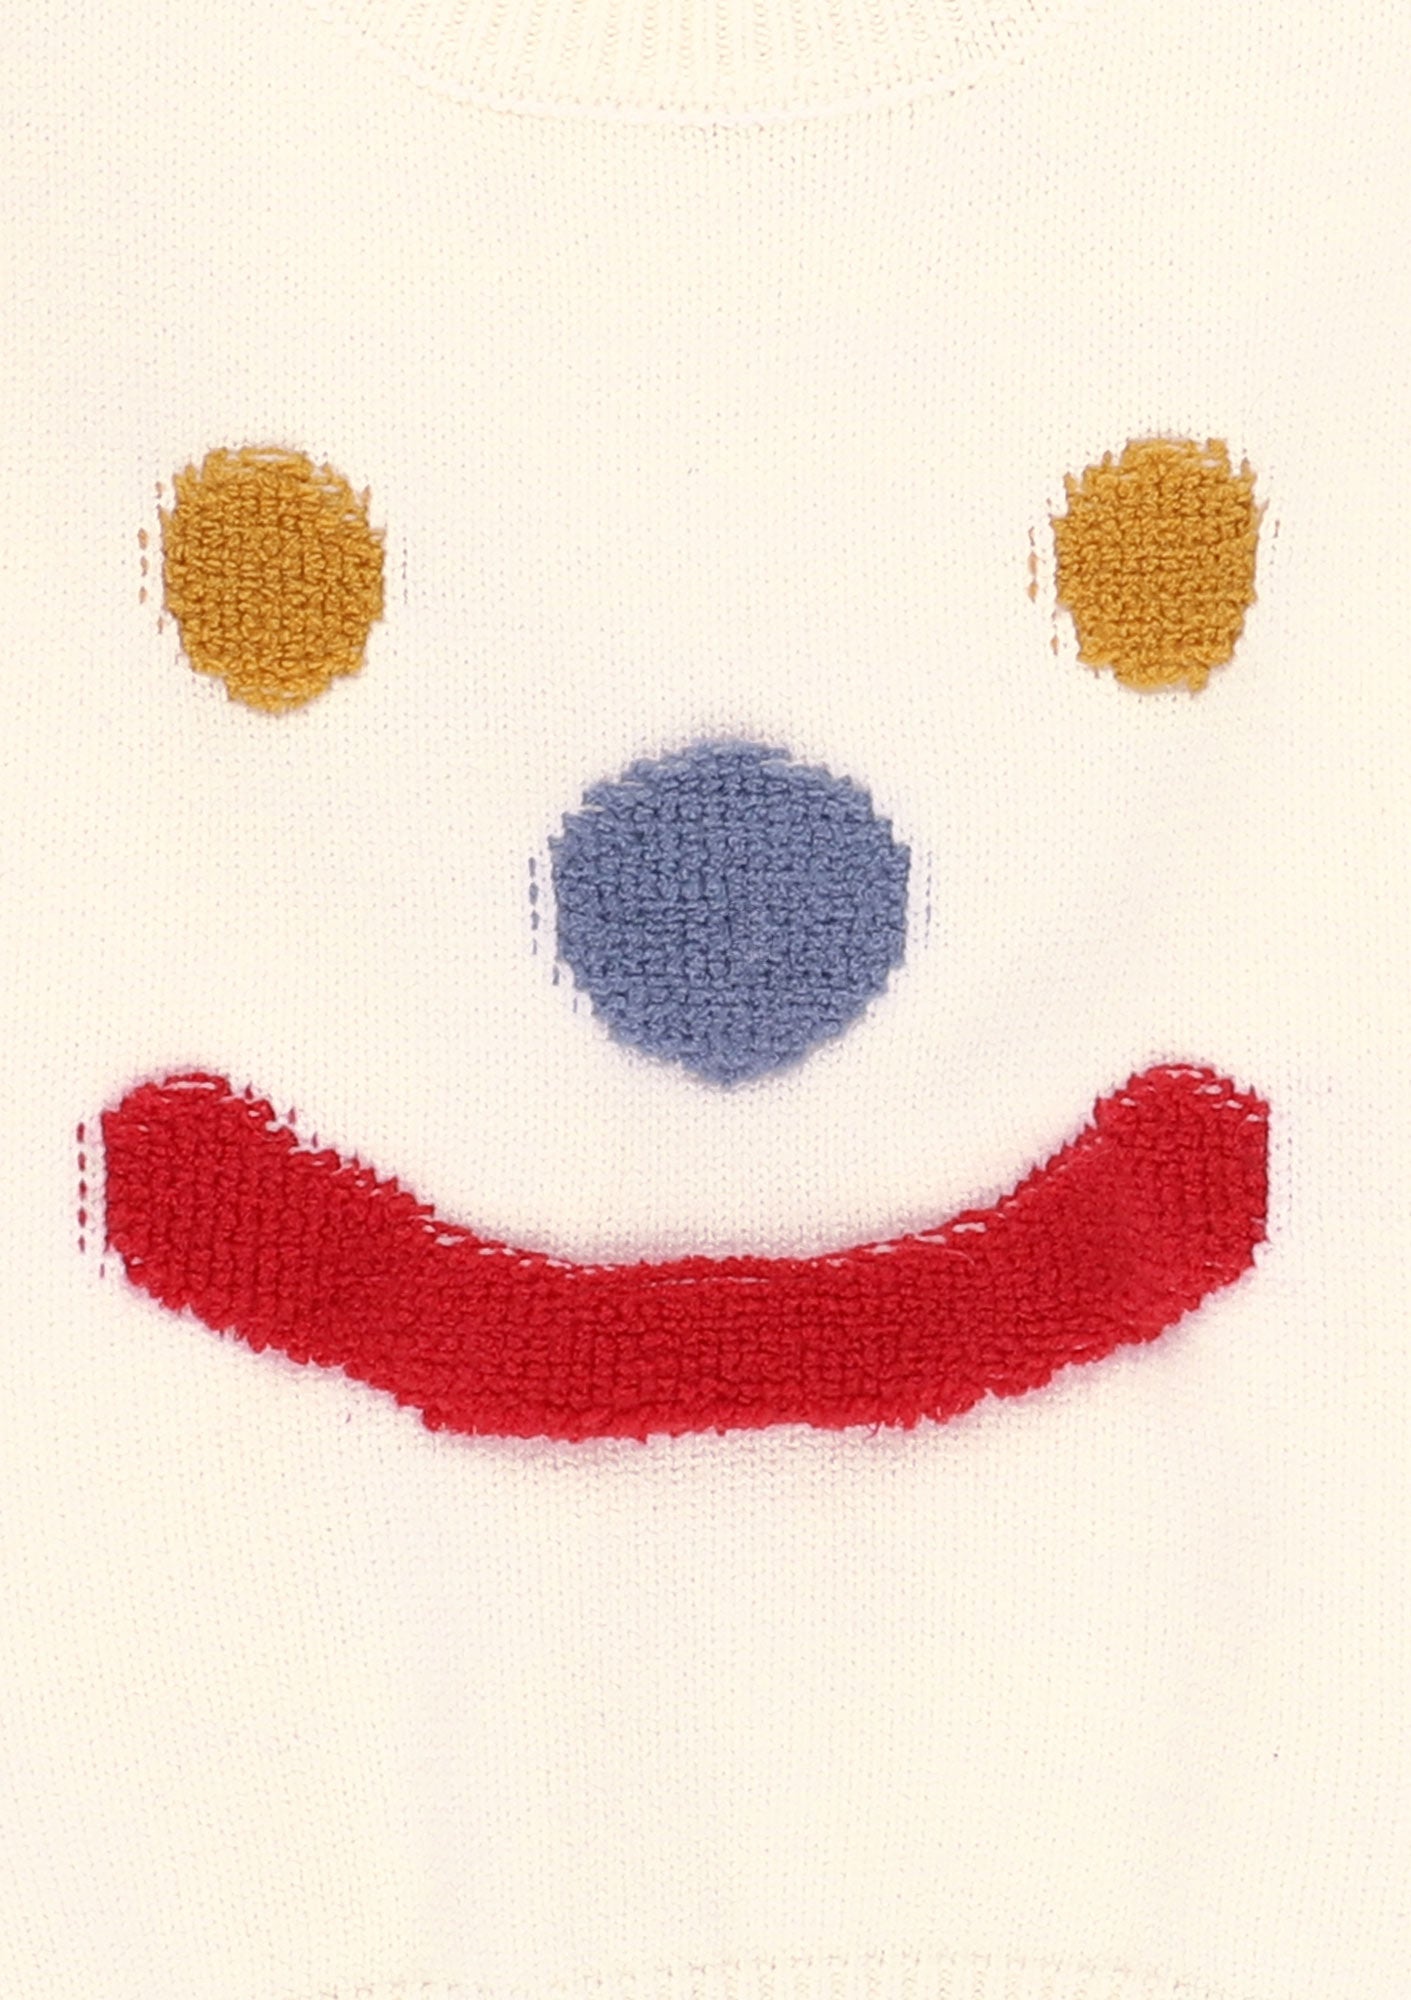 Happy Face Knit Sweater